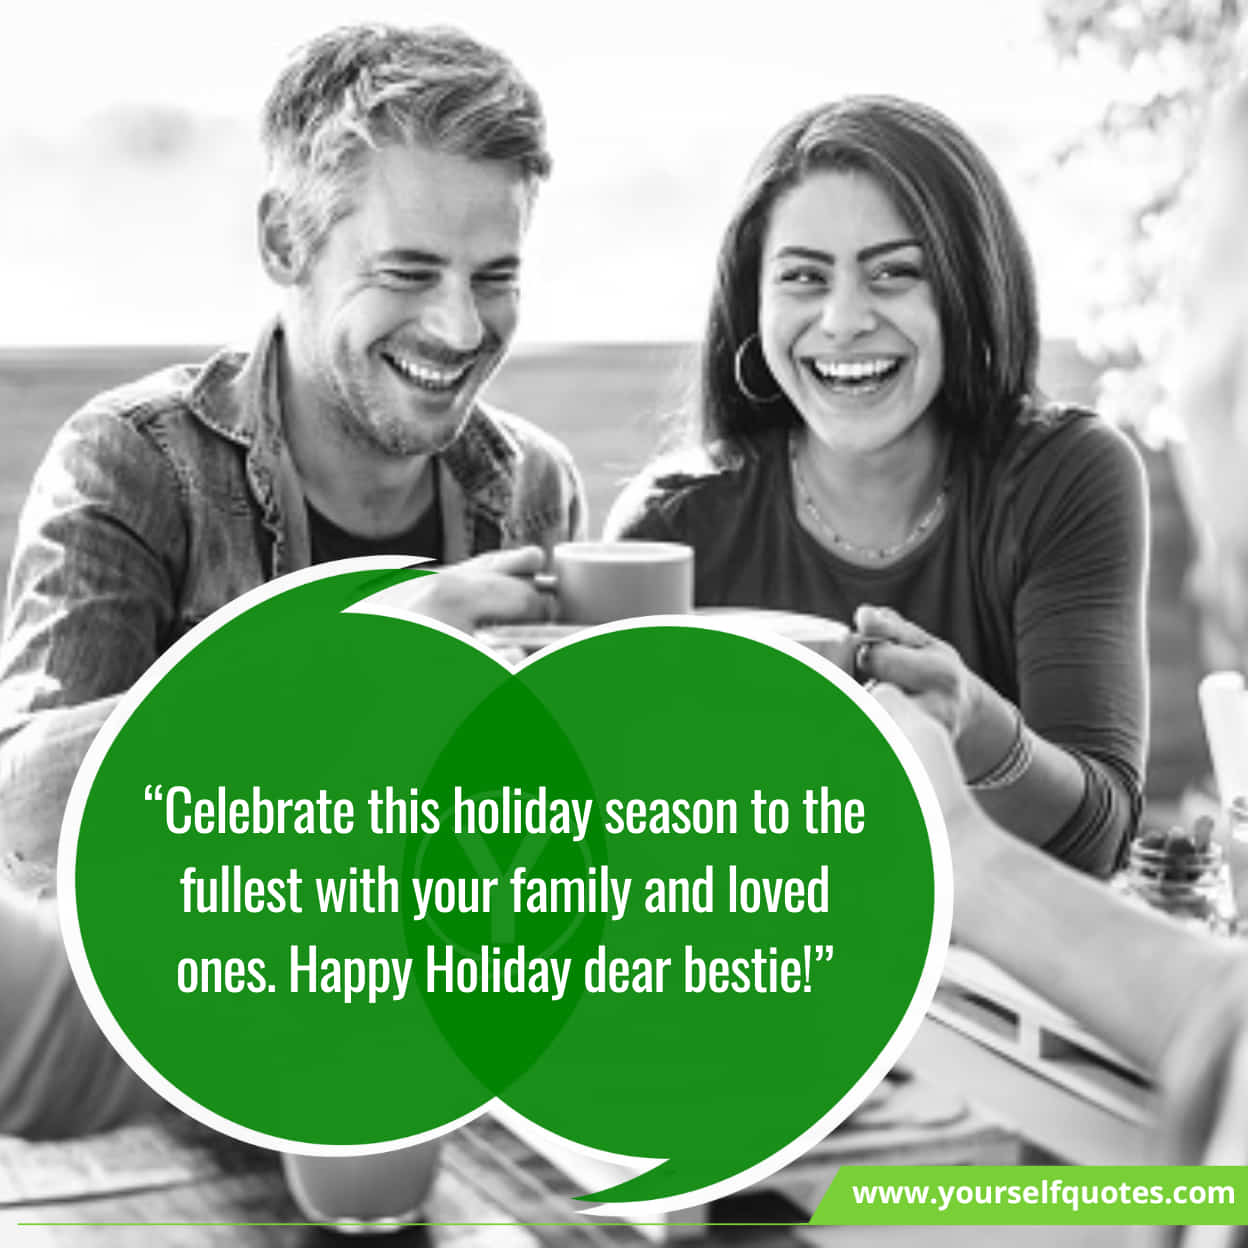 Holiday Sayings For Friends & Family